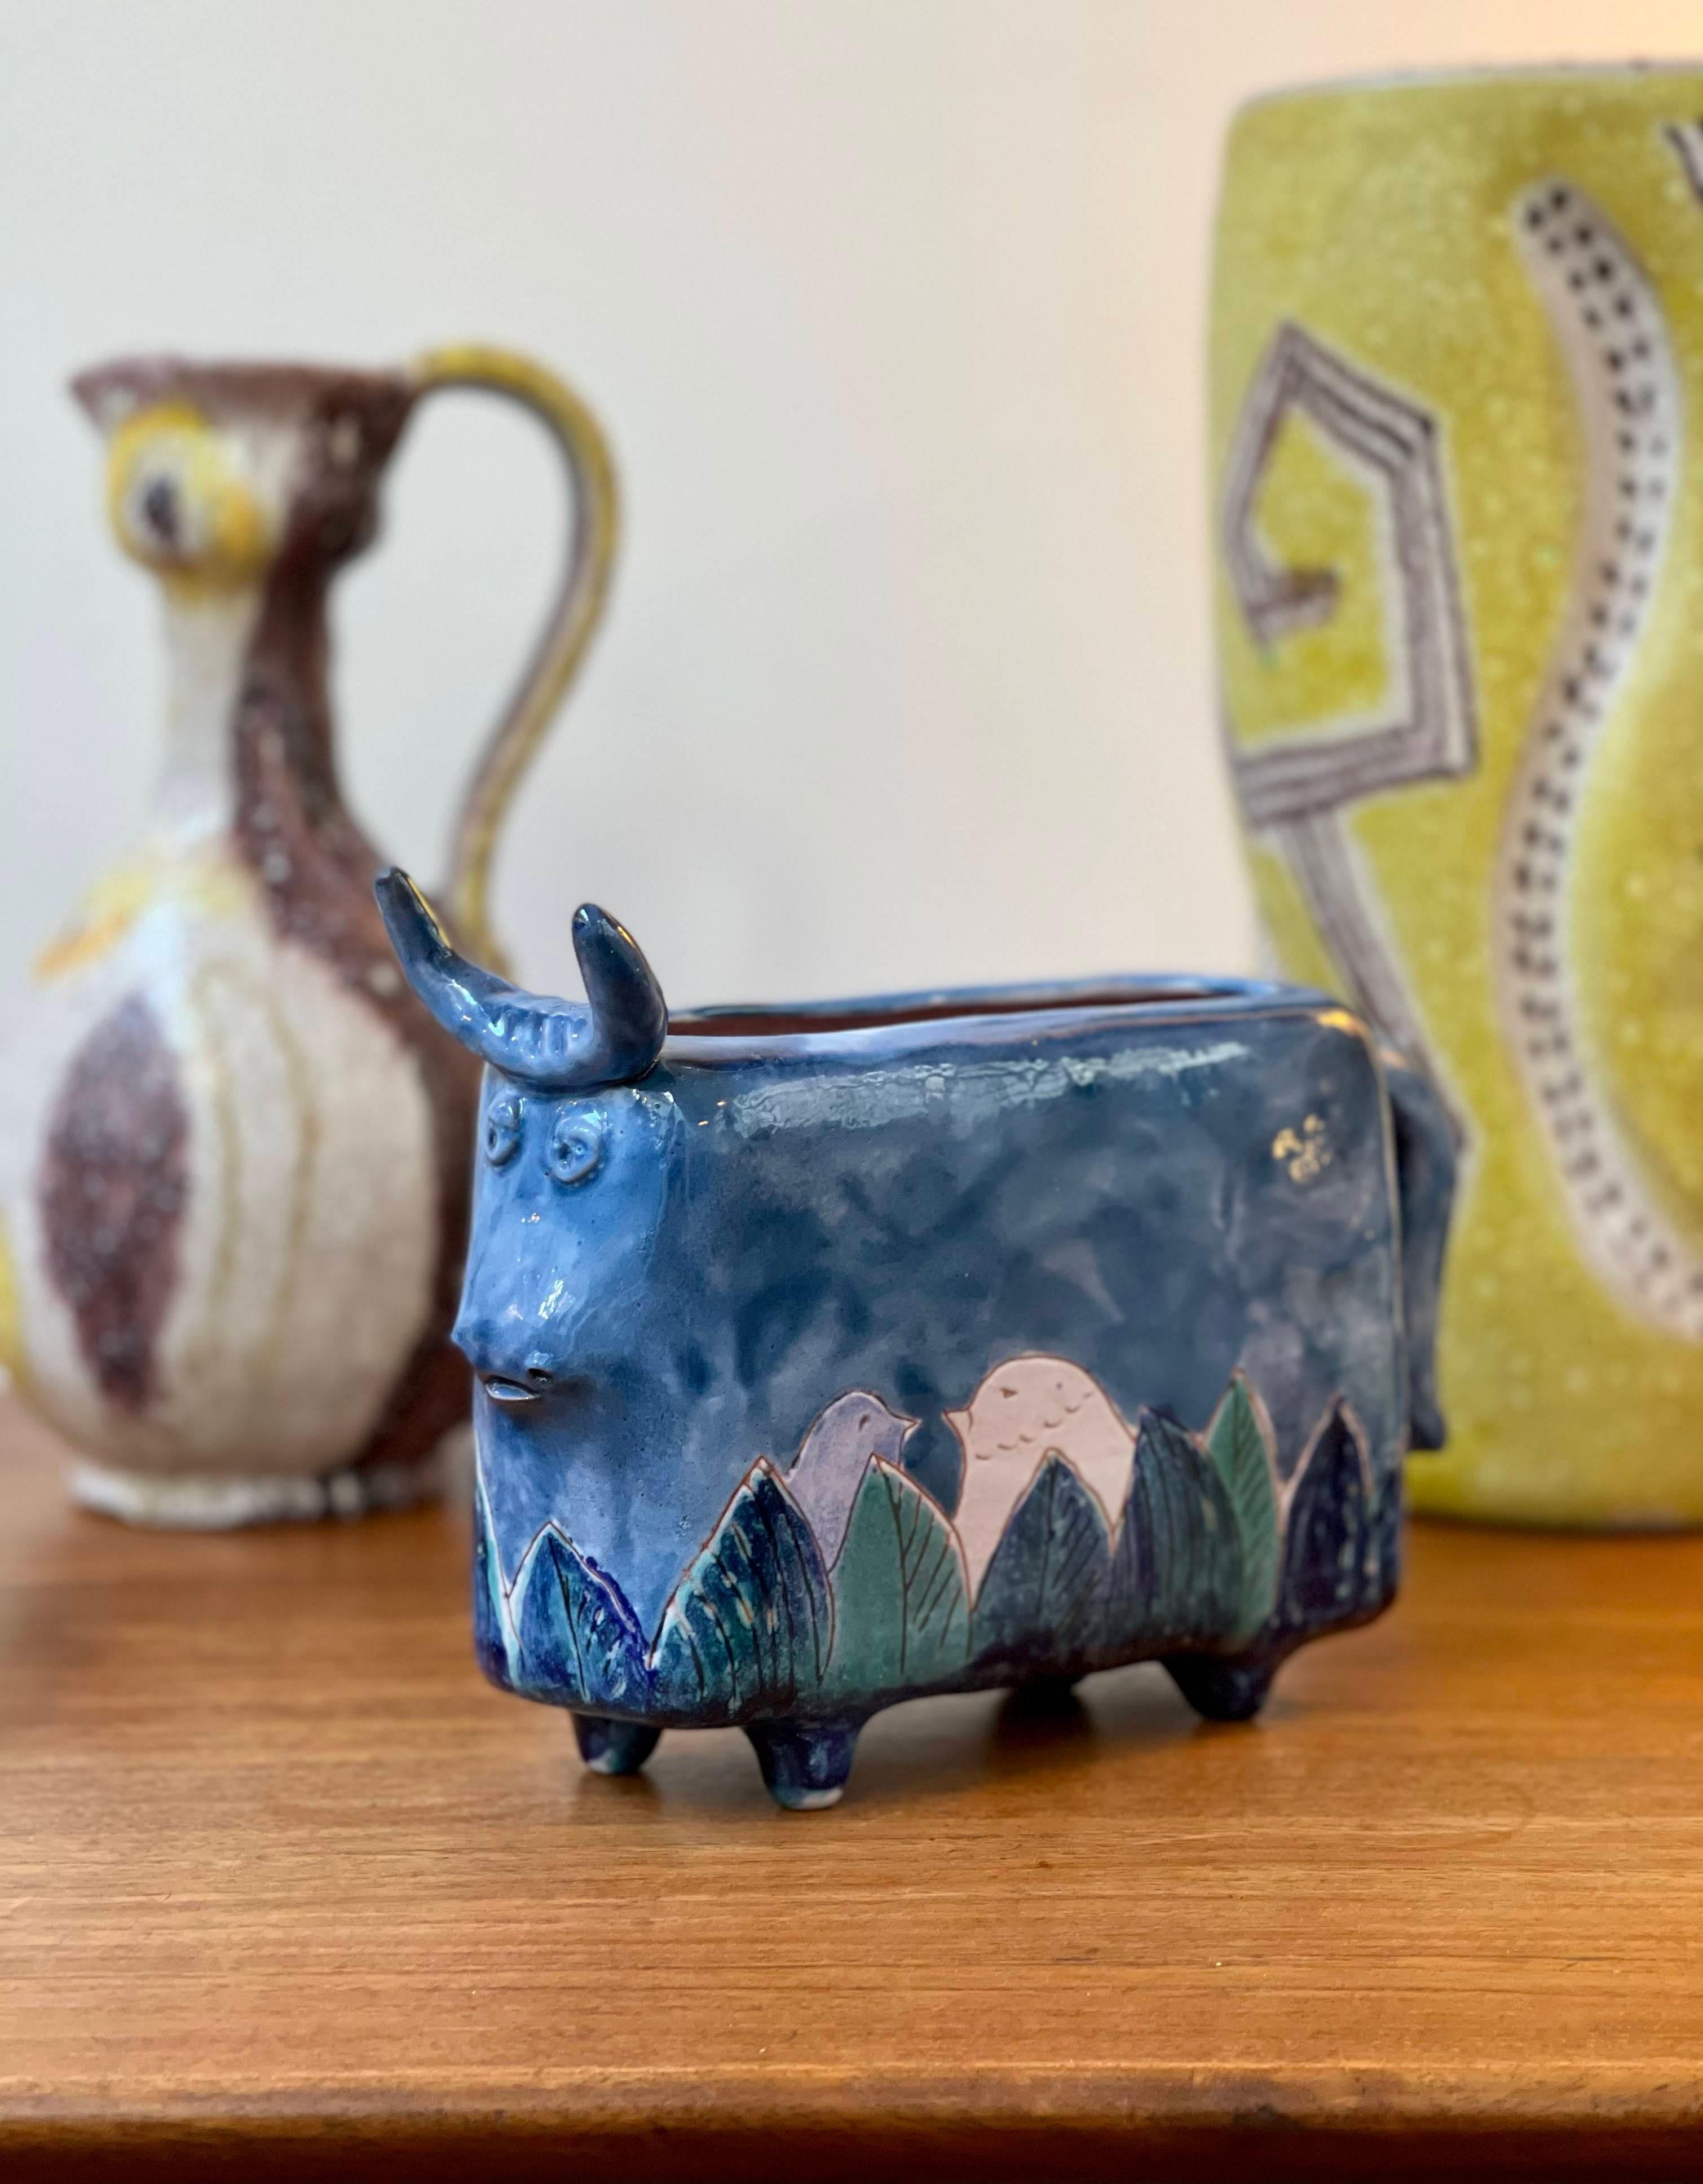 Zoomorphic ceramic bull-shaped flower vase by the Cloutier brothers (circa 1970s). This rare and unique flower vase was made in one of the Cloutier's trademark rich blue colours with whimsical bird and leaf motif emerging from and encircling the